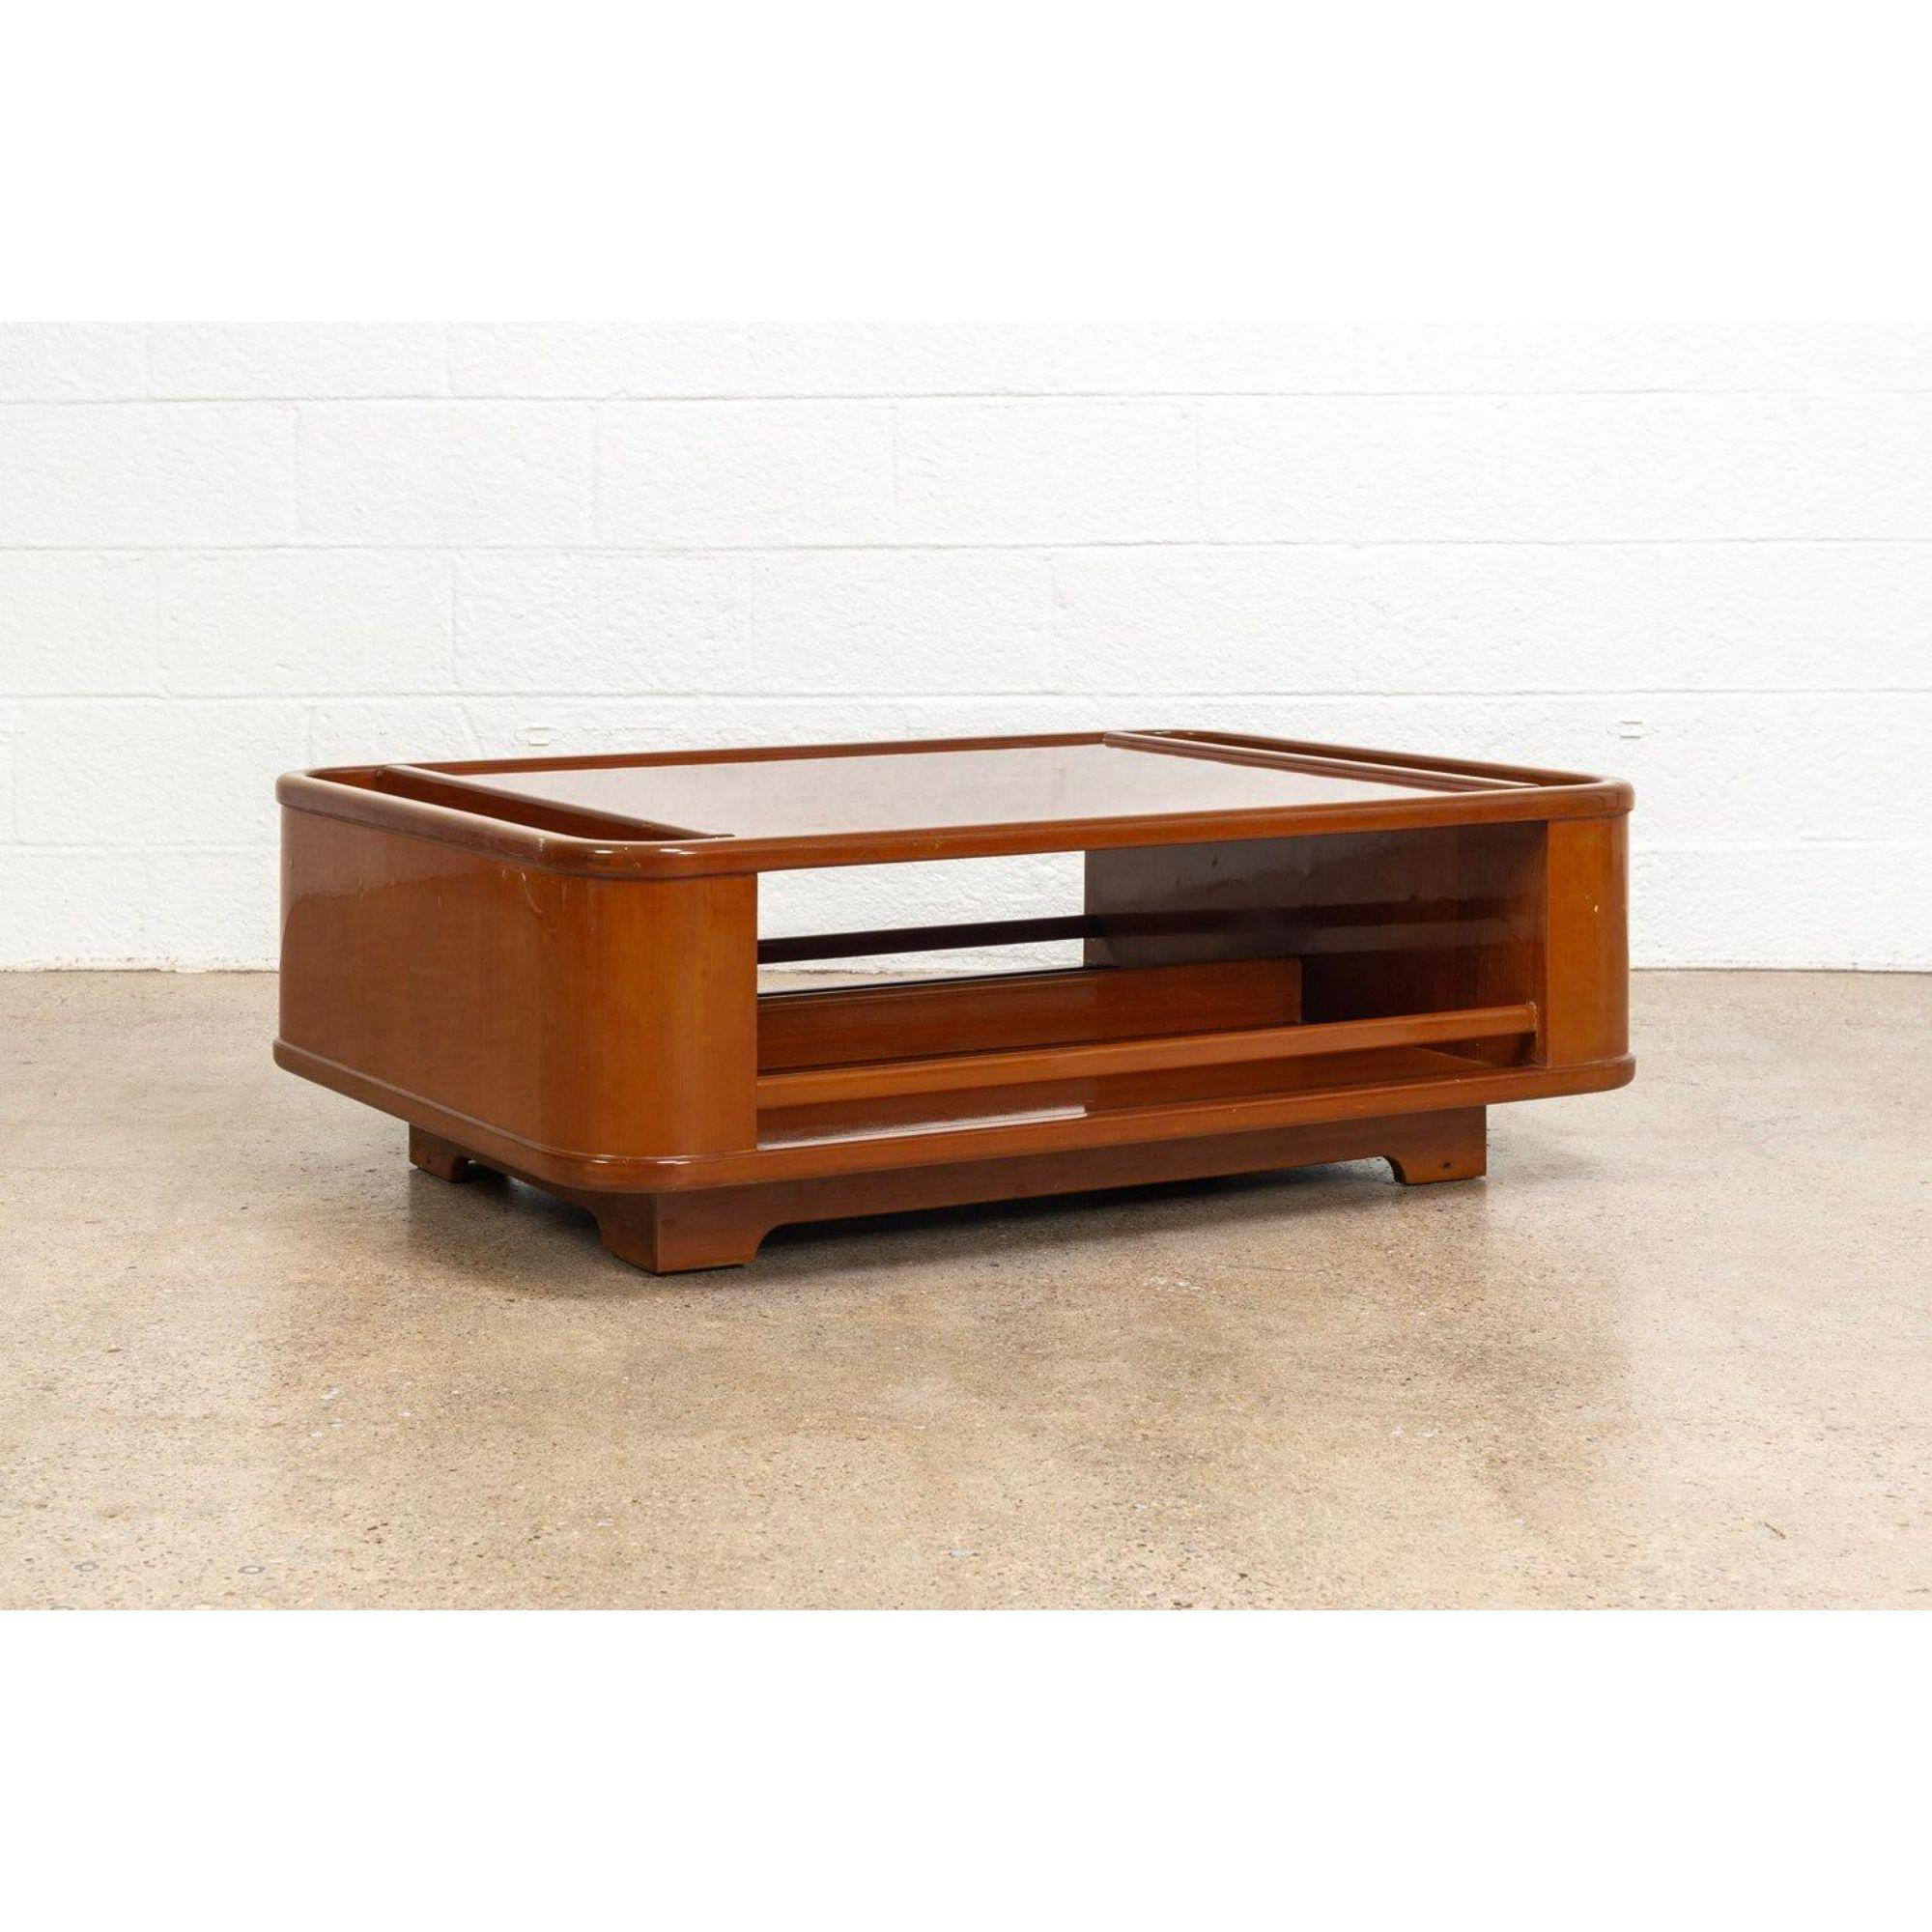 Italian Mid-Century Modern Coffee Table in Lacquered Wood, 1970s